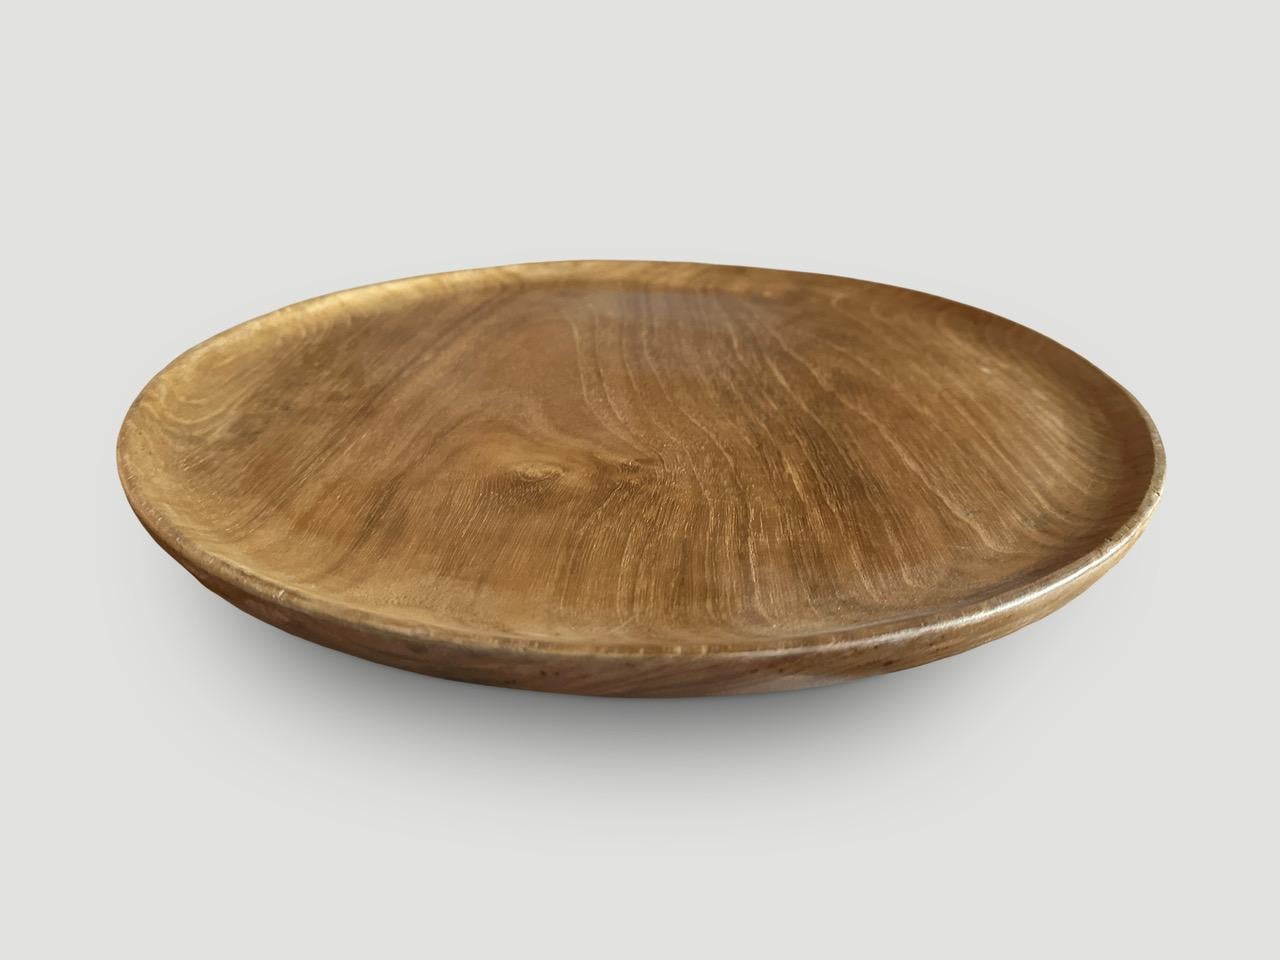 Beautiful wood grain in this minimalist shallow platter. This platter was hand made from a single piece of reclaimed teak wood in the spirit of Wabi-Sabi, a Japanese philosophy that beauty can be found in imperfection and impermanence. It is a